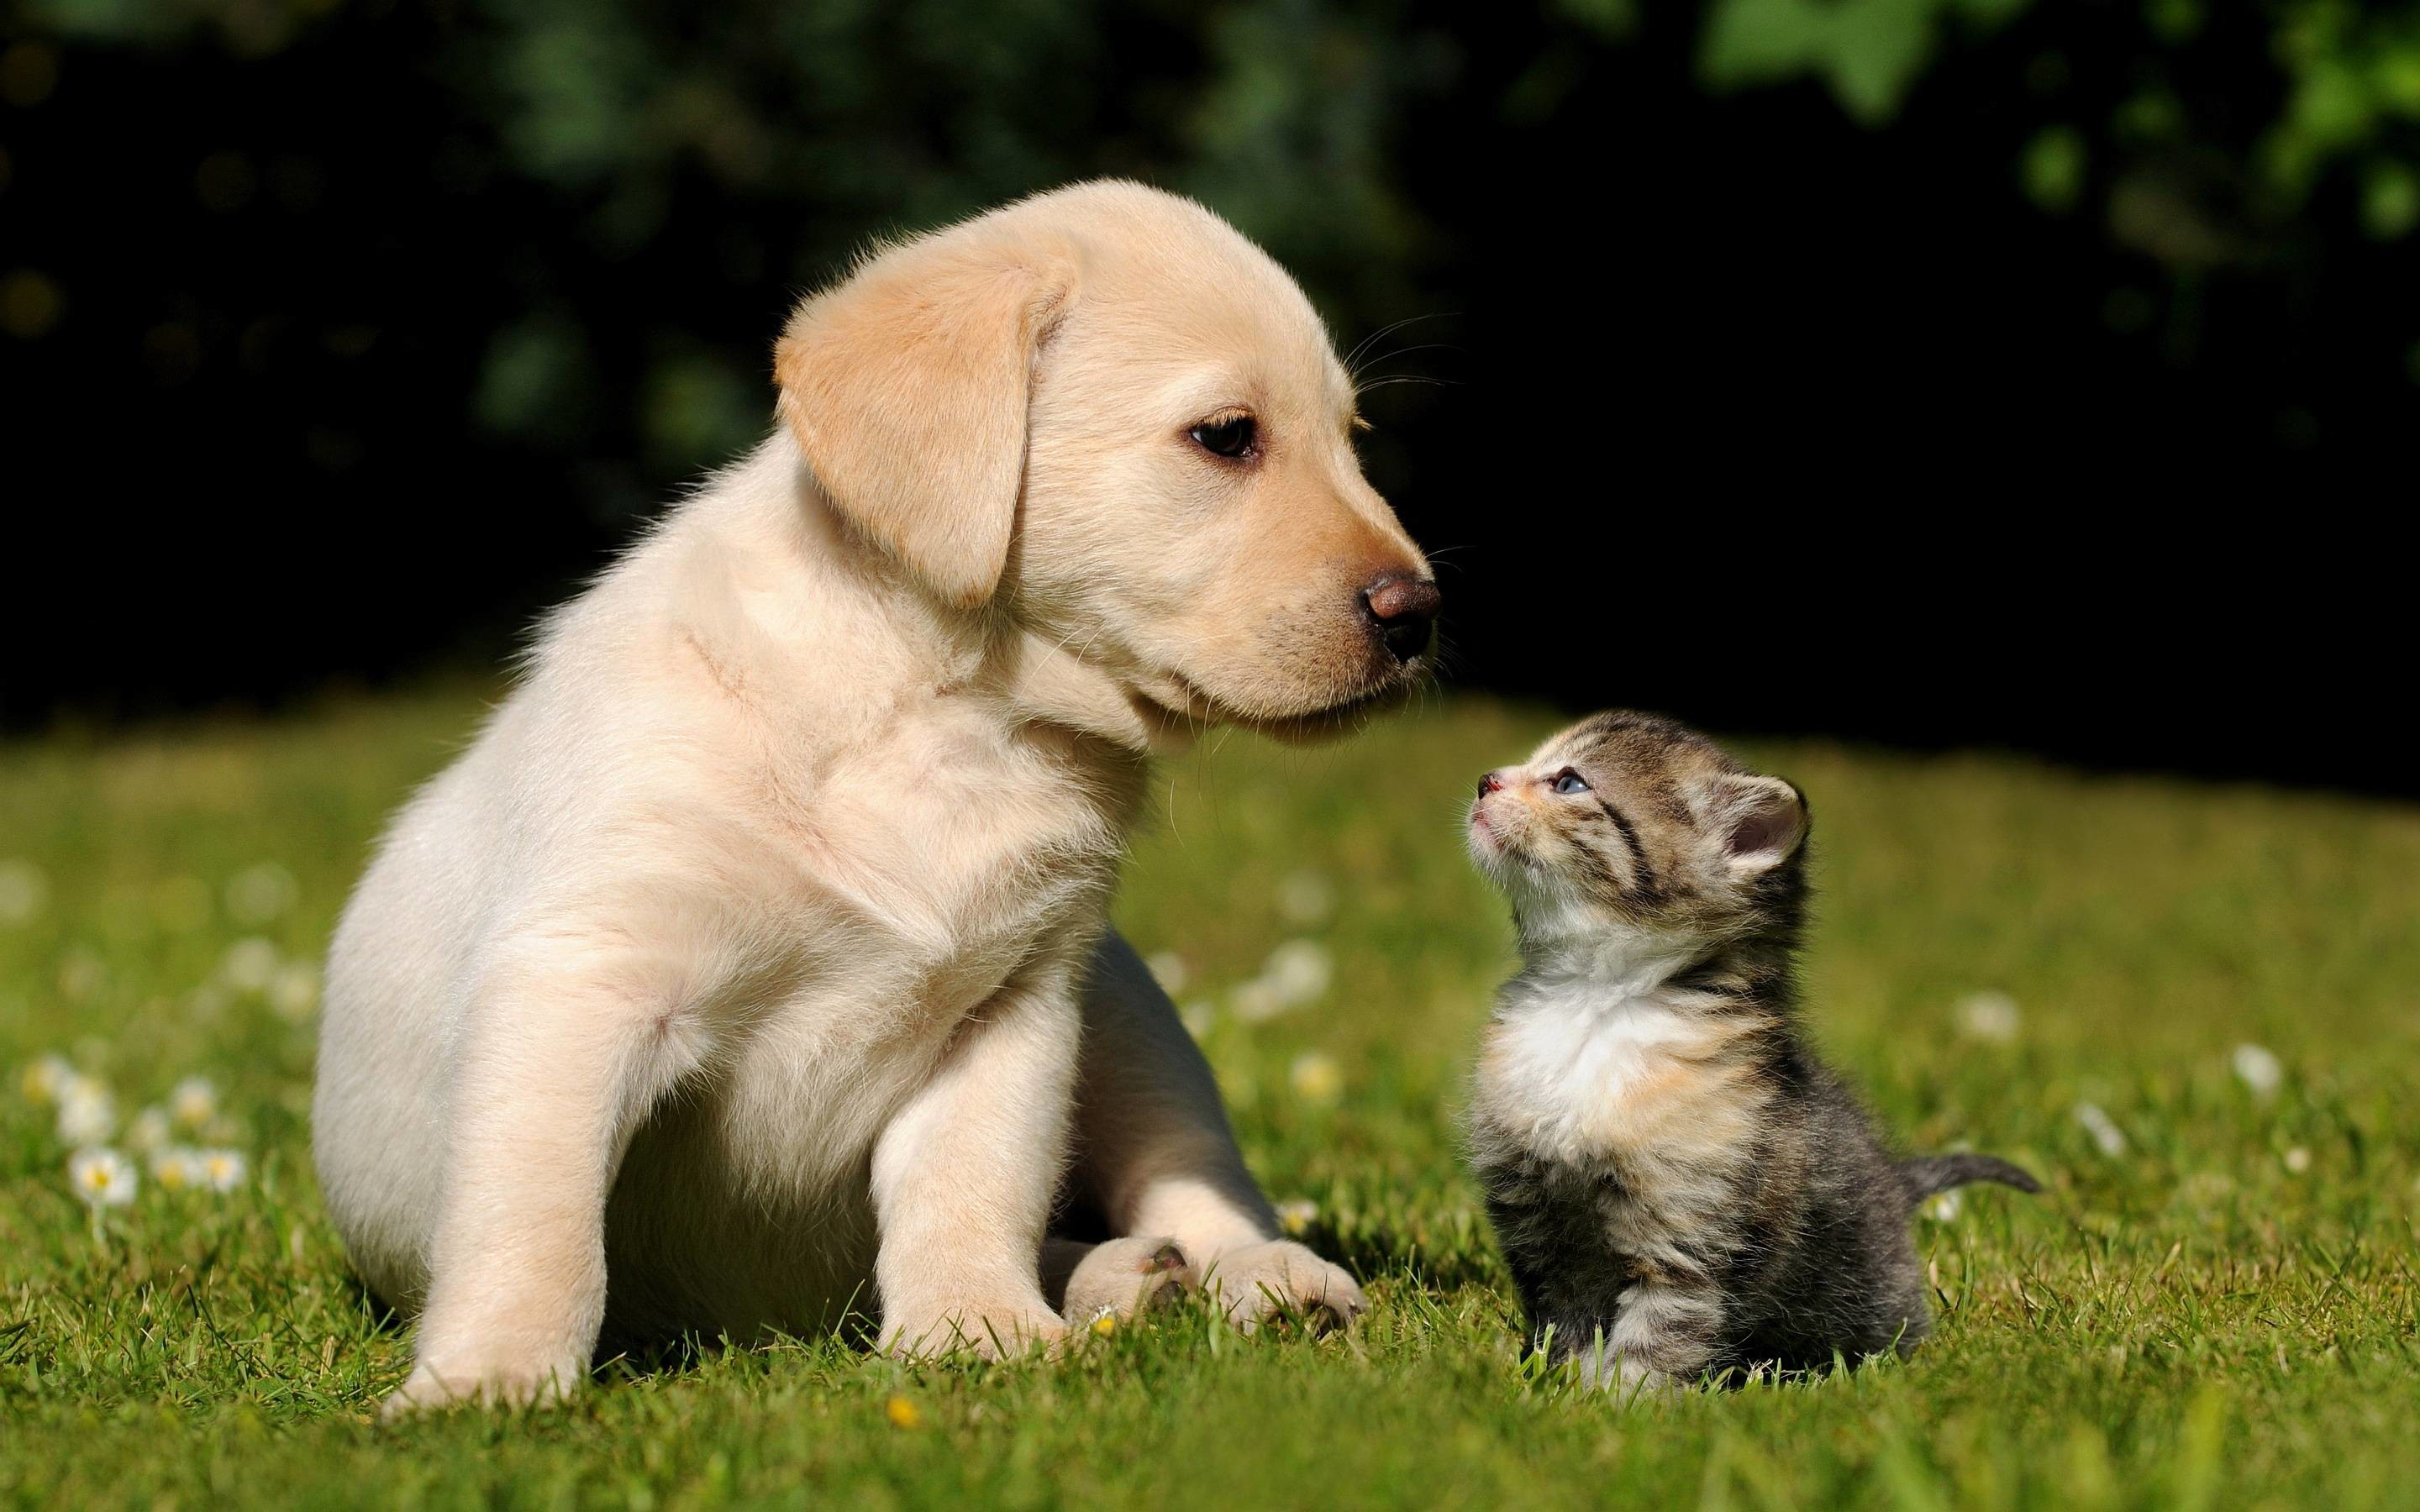 Cute Puppy and Kitten Wallpapers (58+